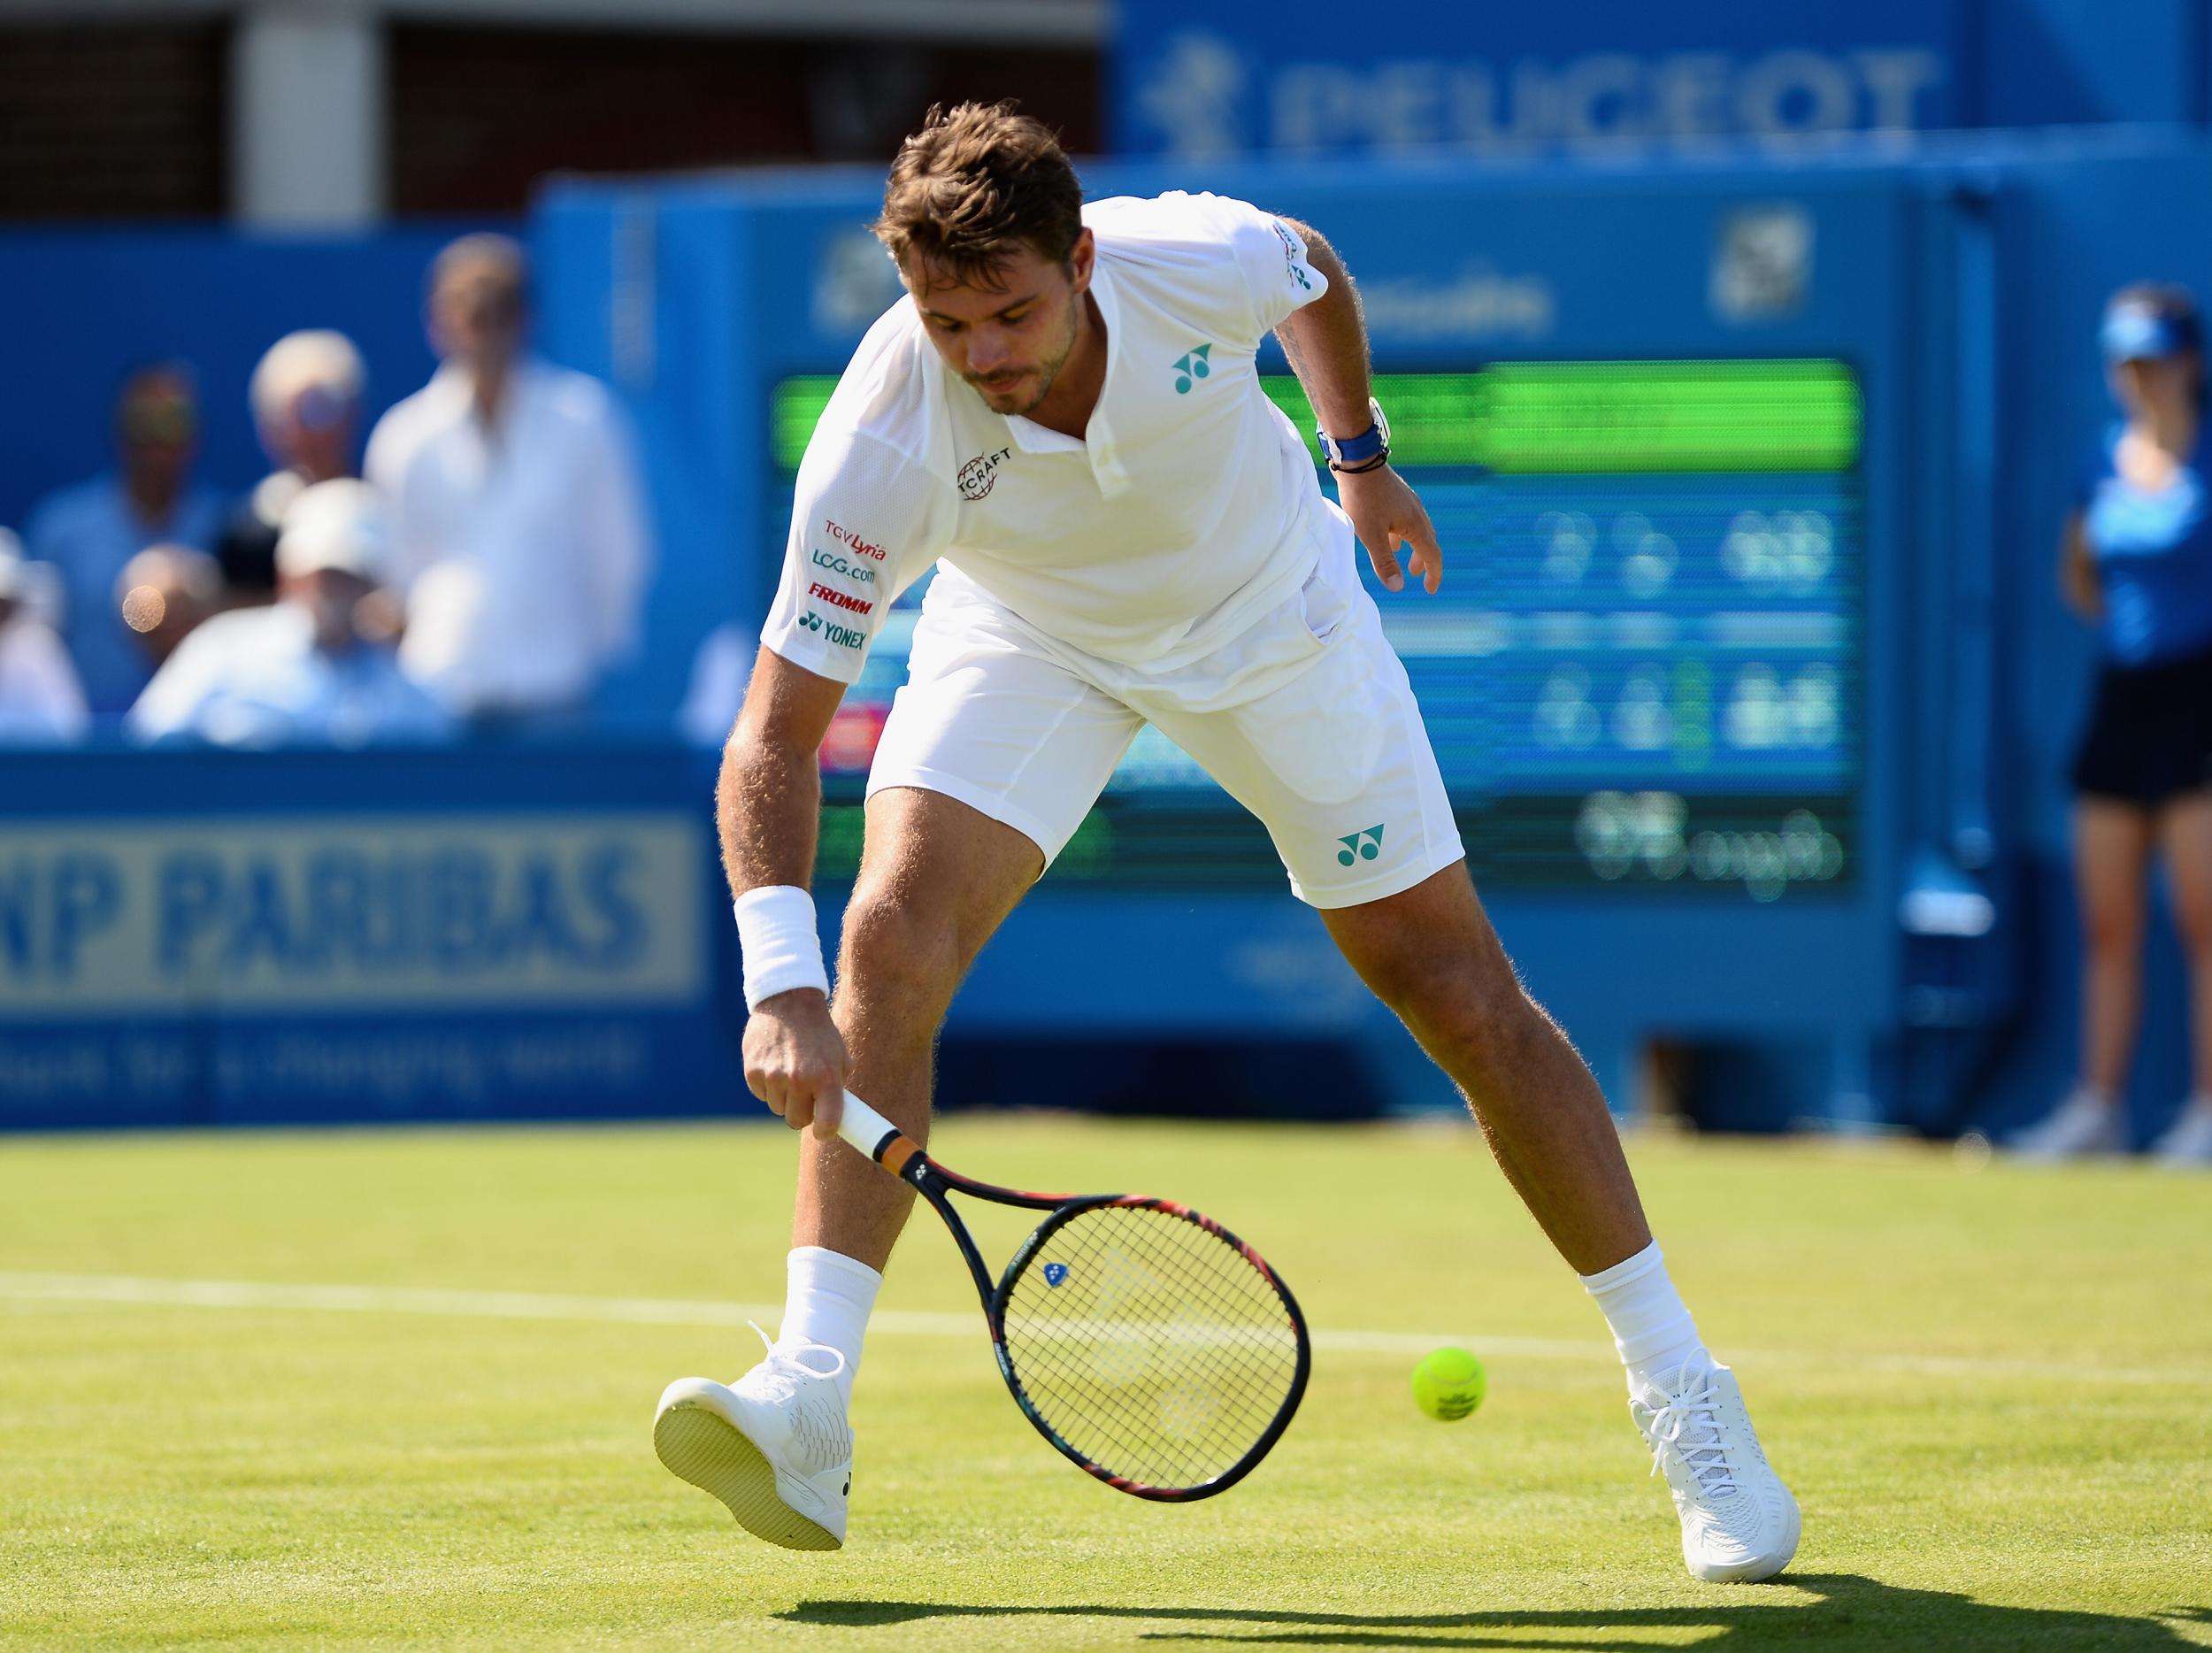 &#13;
Wawrinka's appearance at Queen's did not go according to plan &#13;